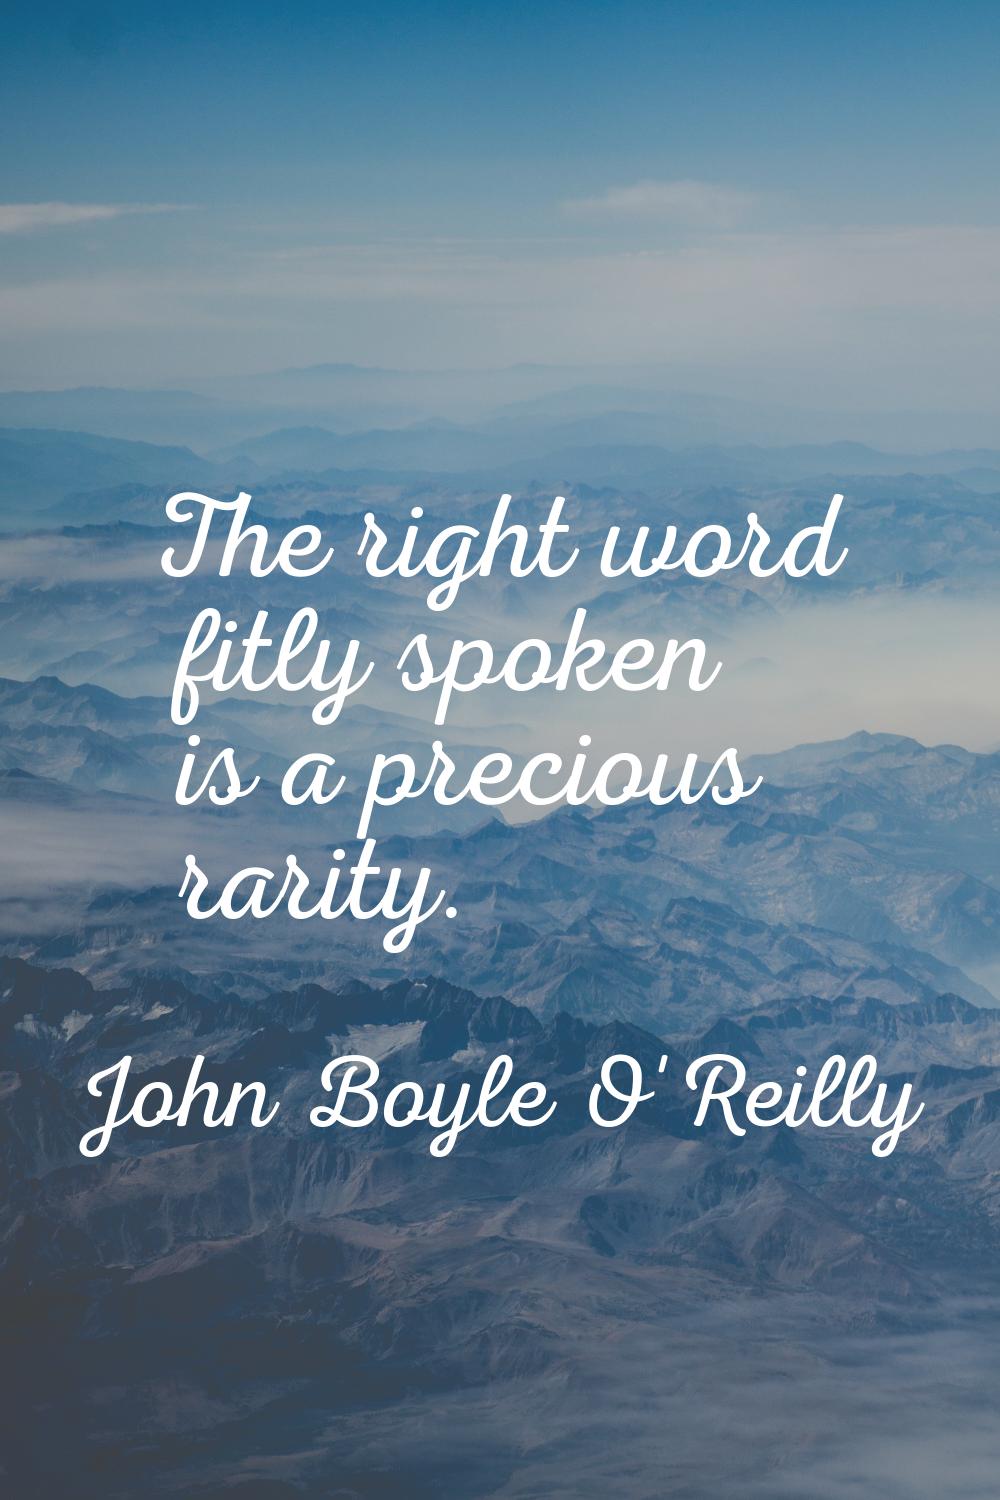 The right word fitly spoken is a precious rarity.